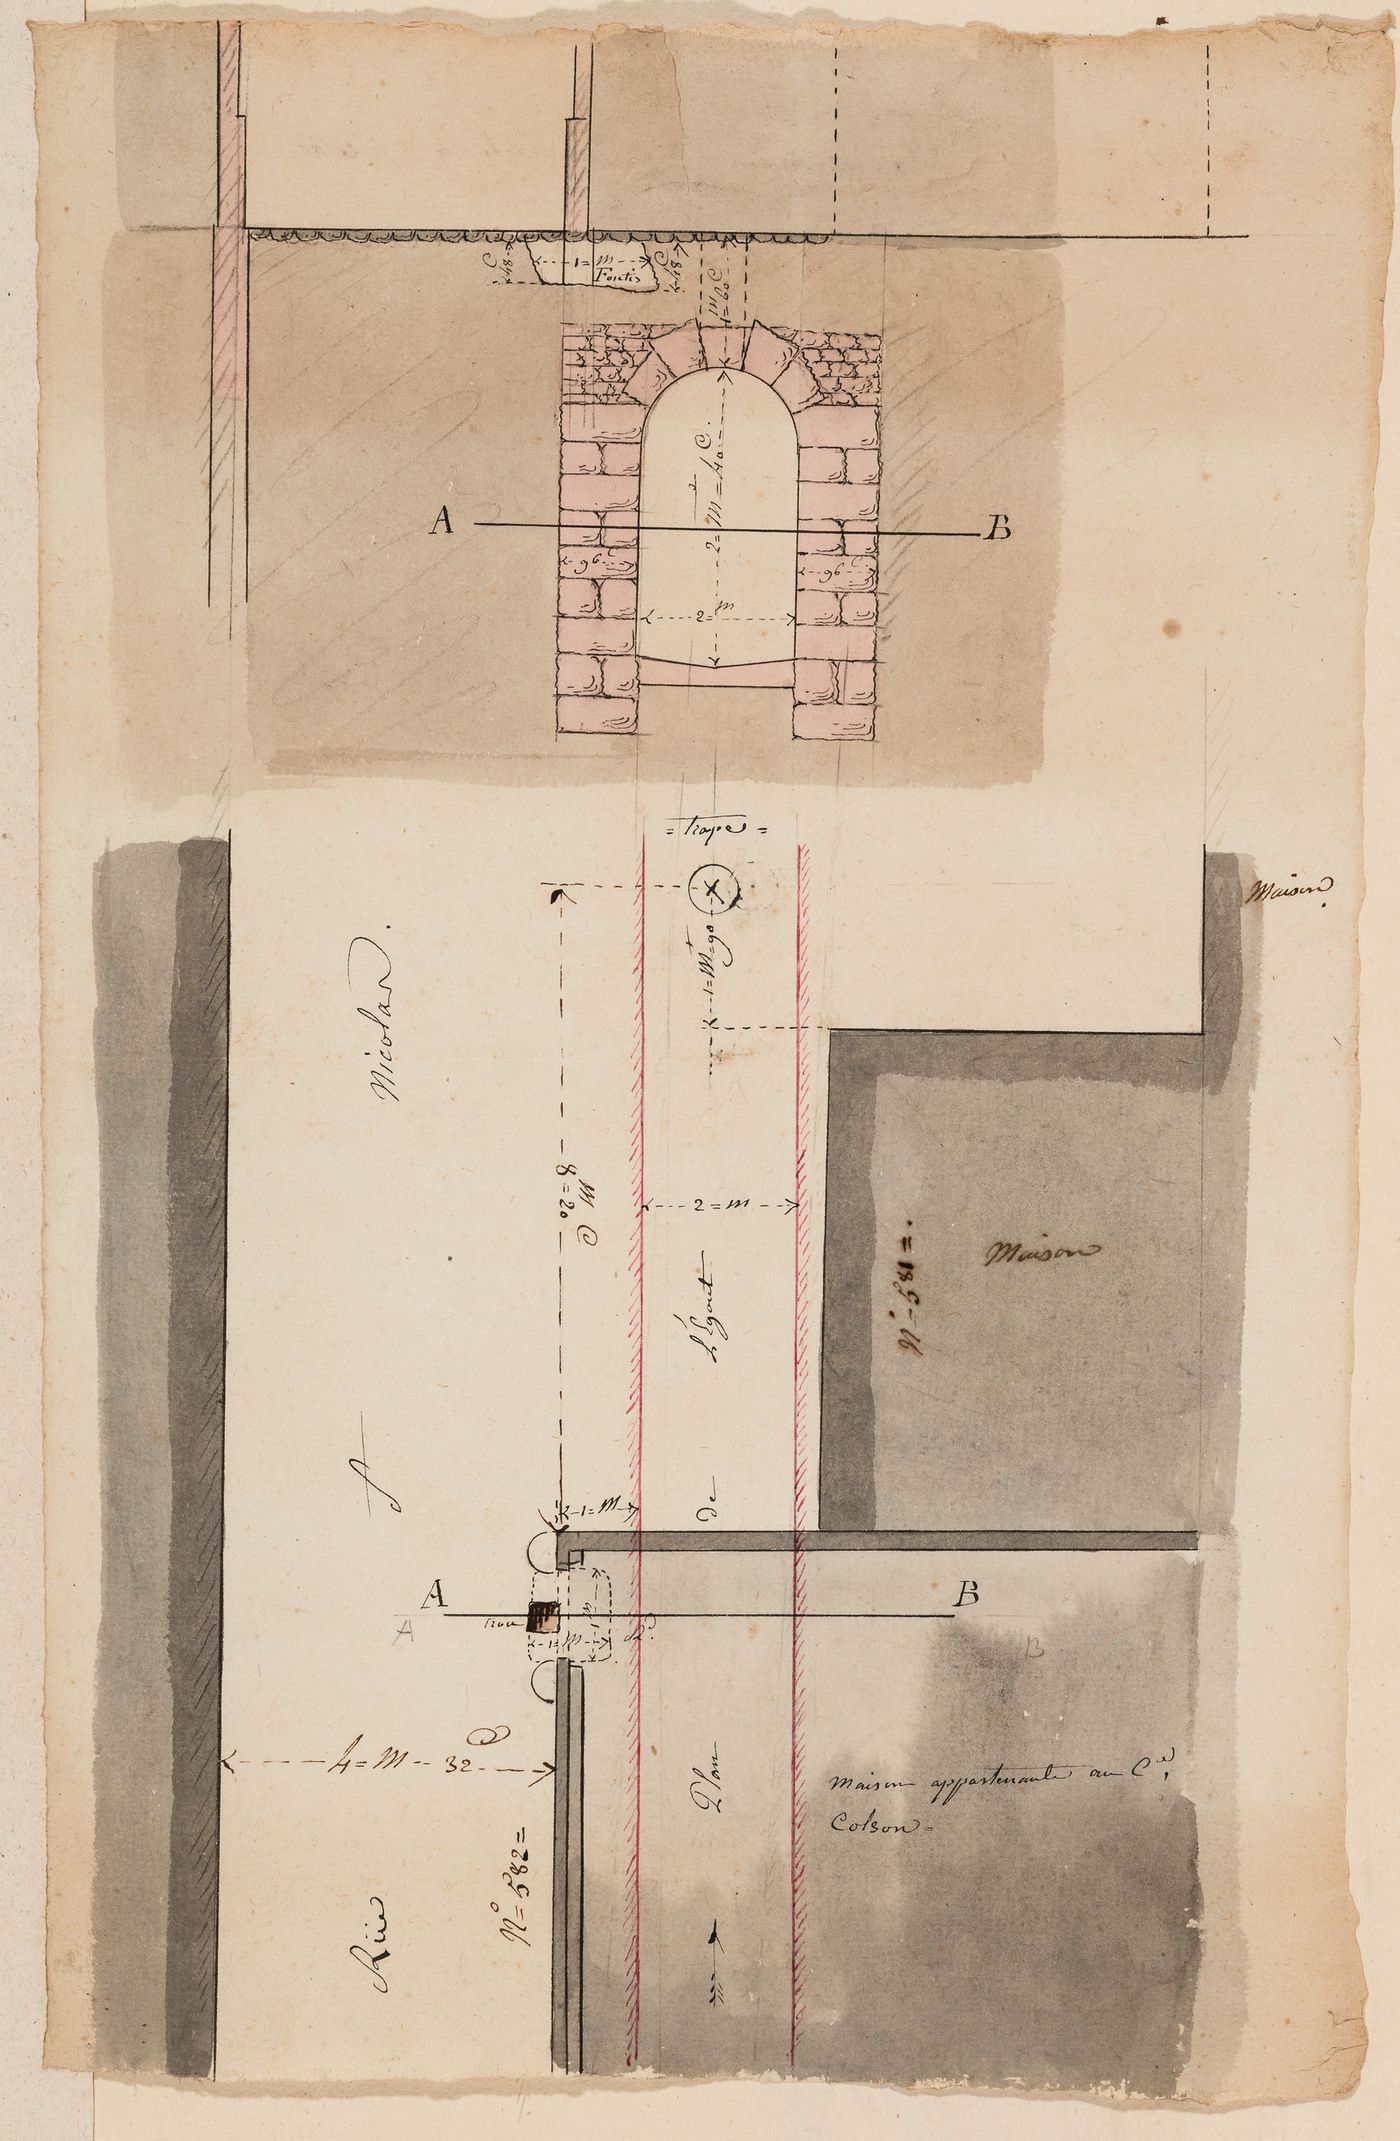 Project for alterations to the caserne de gendarmerie, rue du Faubourg-Saint-Martin: Plan and section for the sewer system, rue Saint-Nicolas